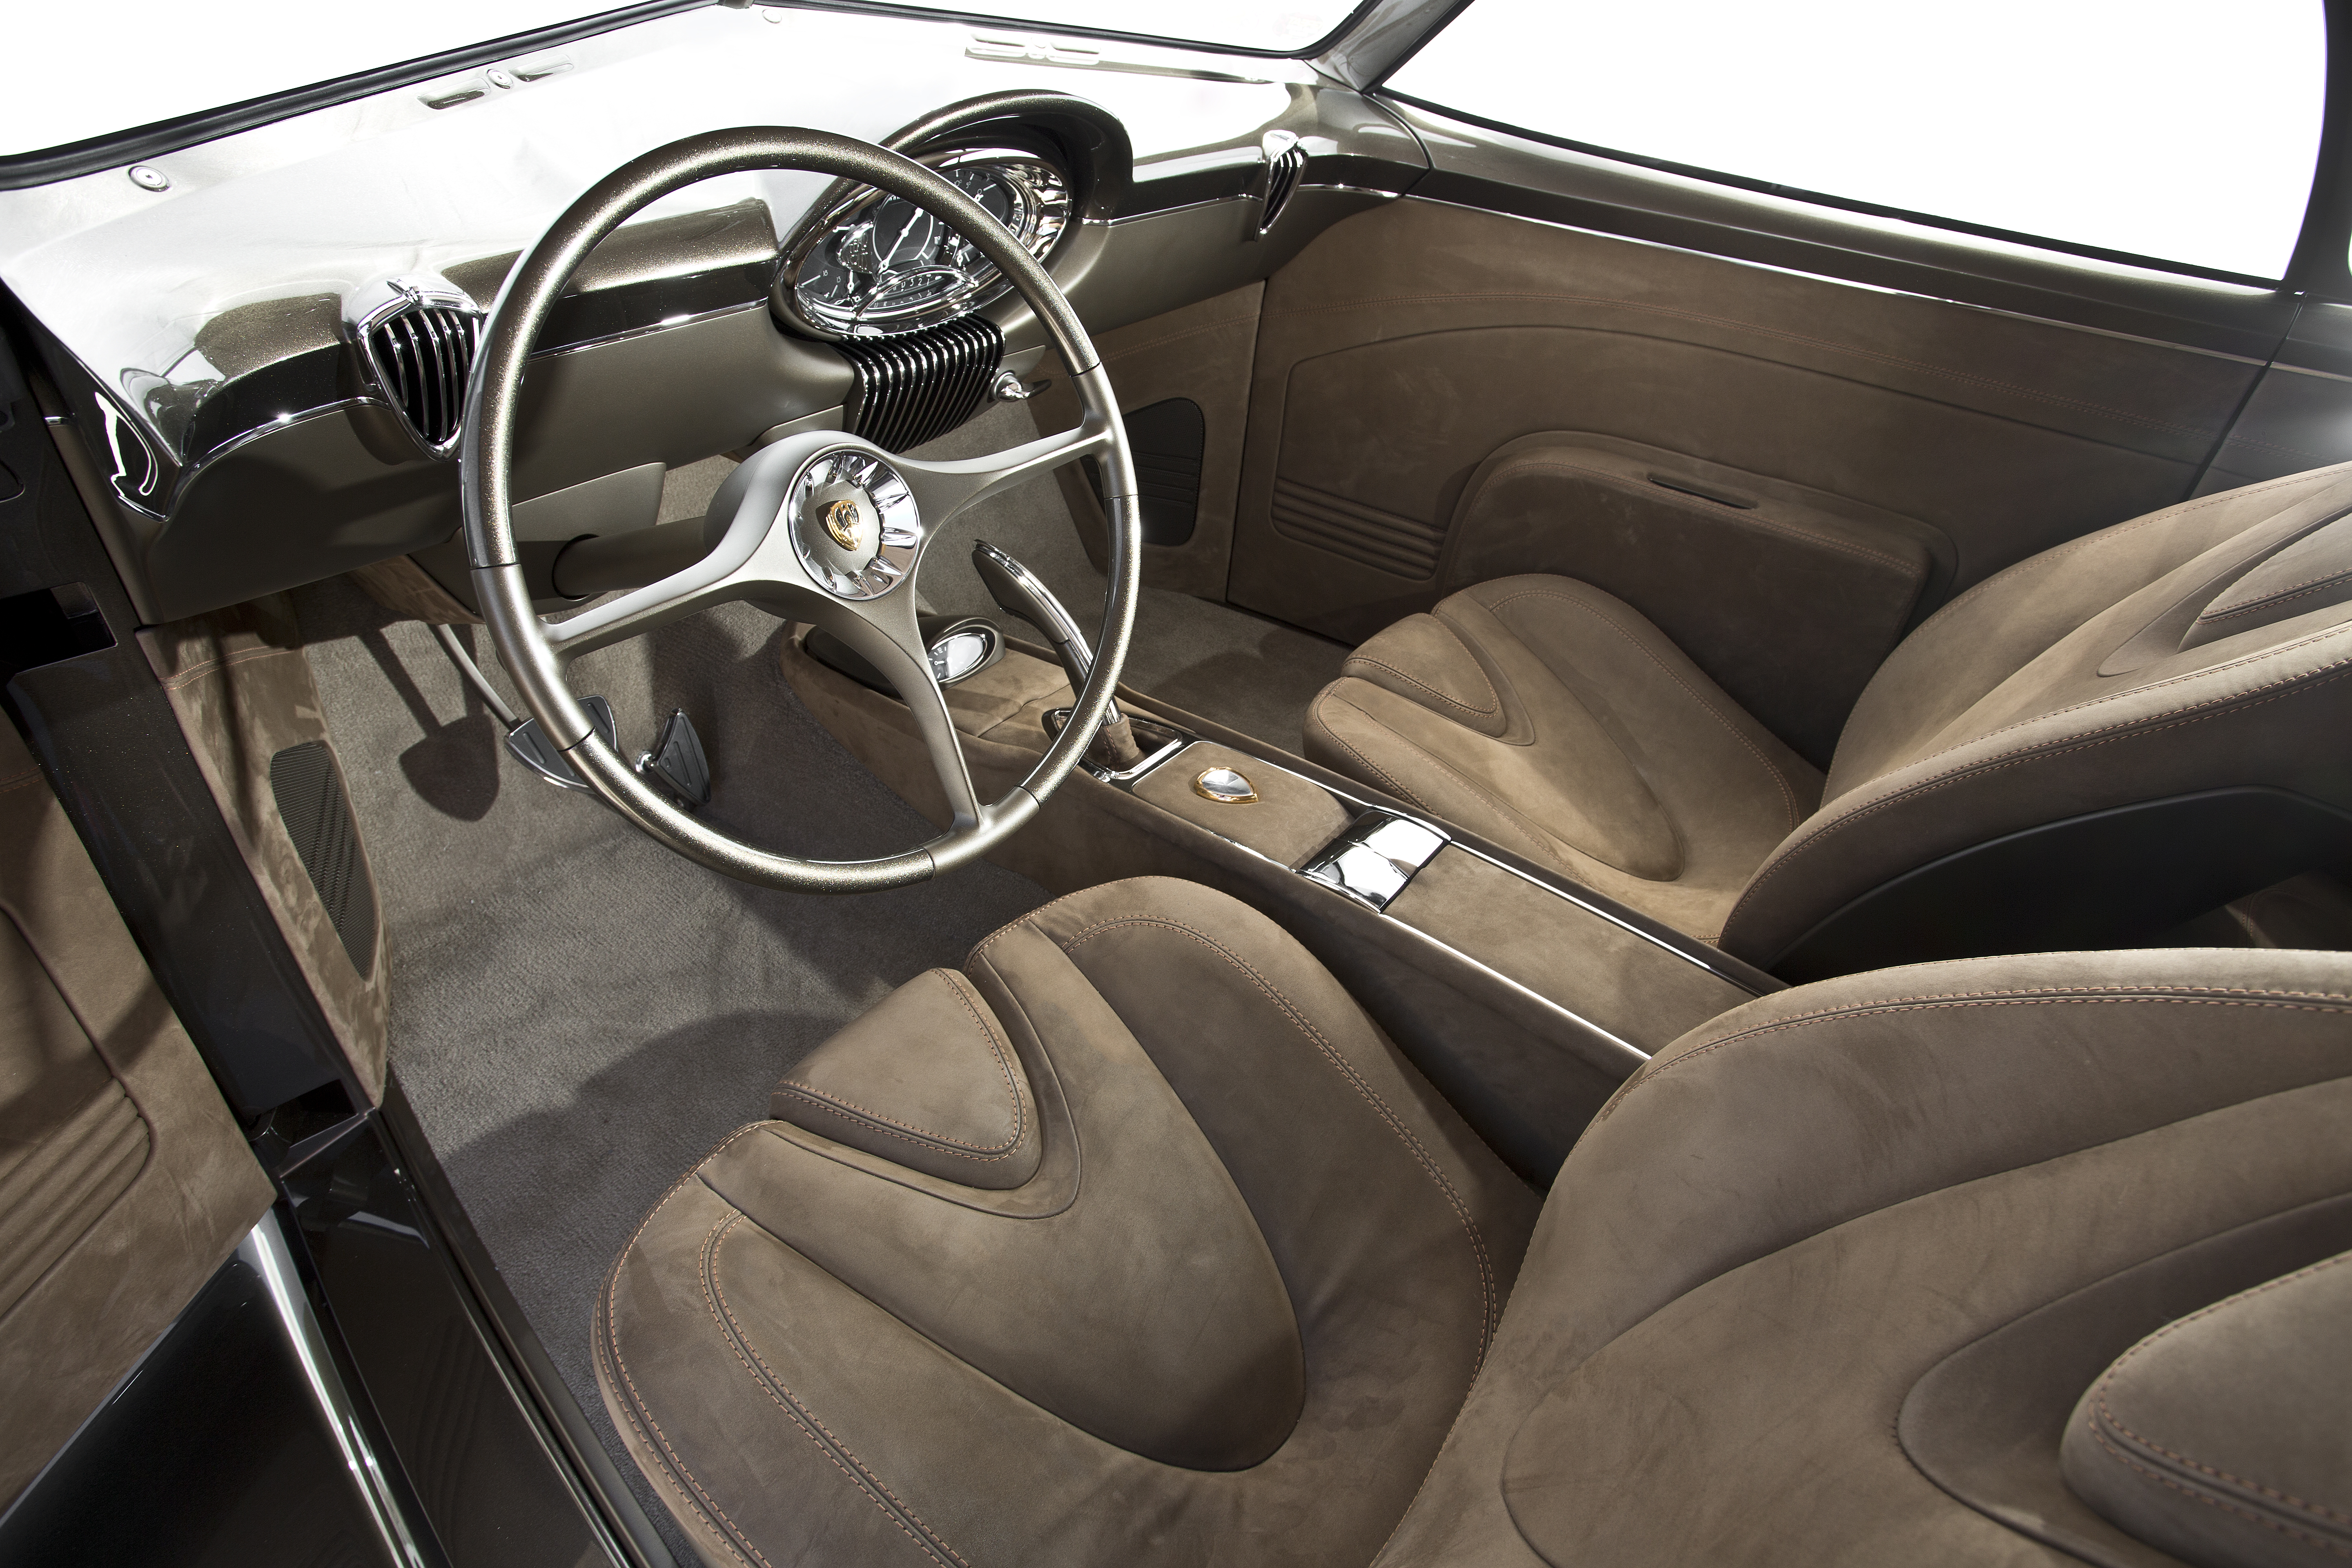 New Tech In Old Cars Upgrading With A Custom Car Interior